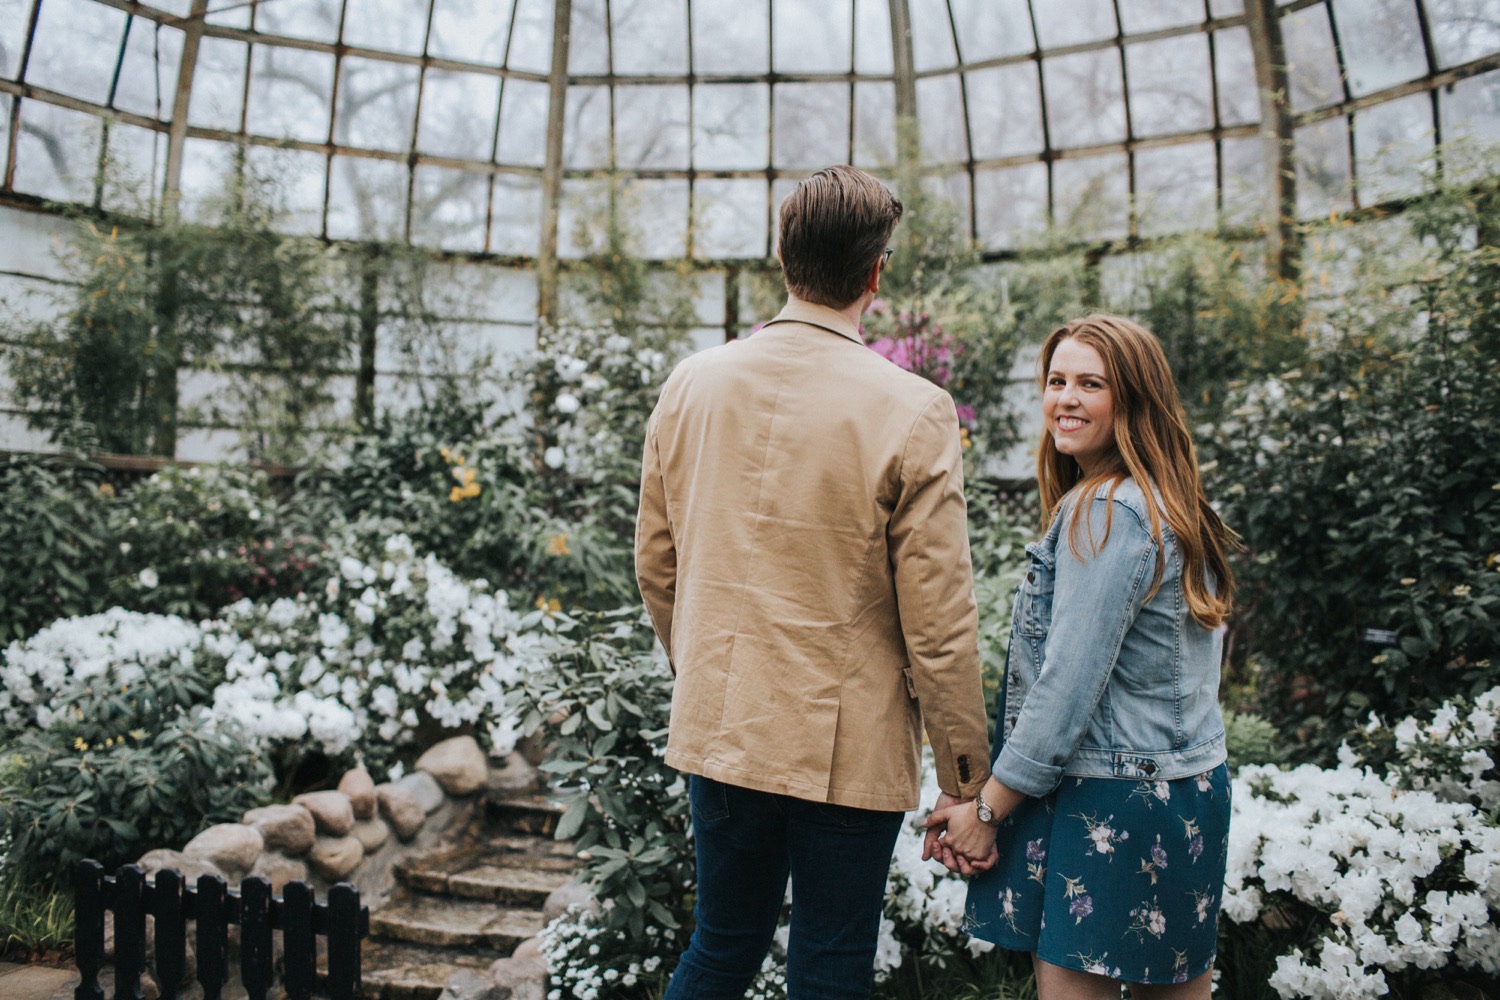 Lincoln Park Conservatory Engagement Session